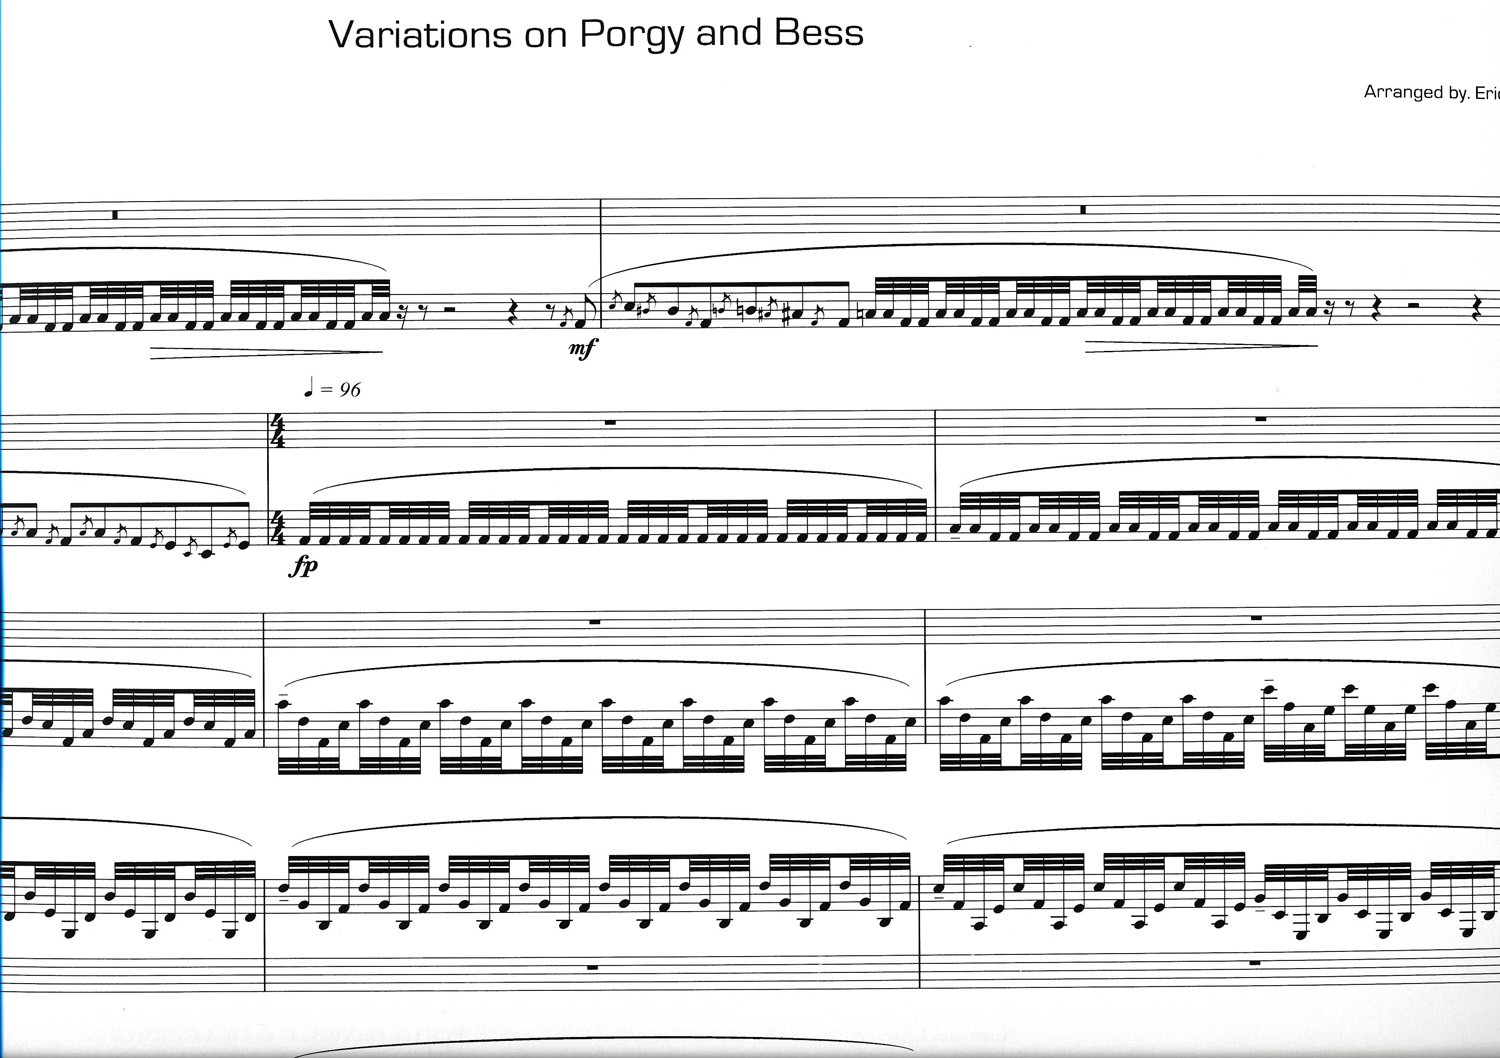 Variations on Porgy and Bess